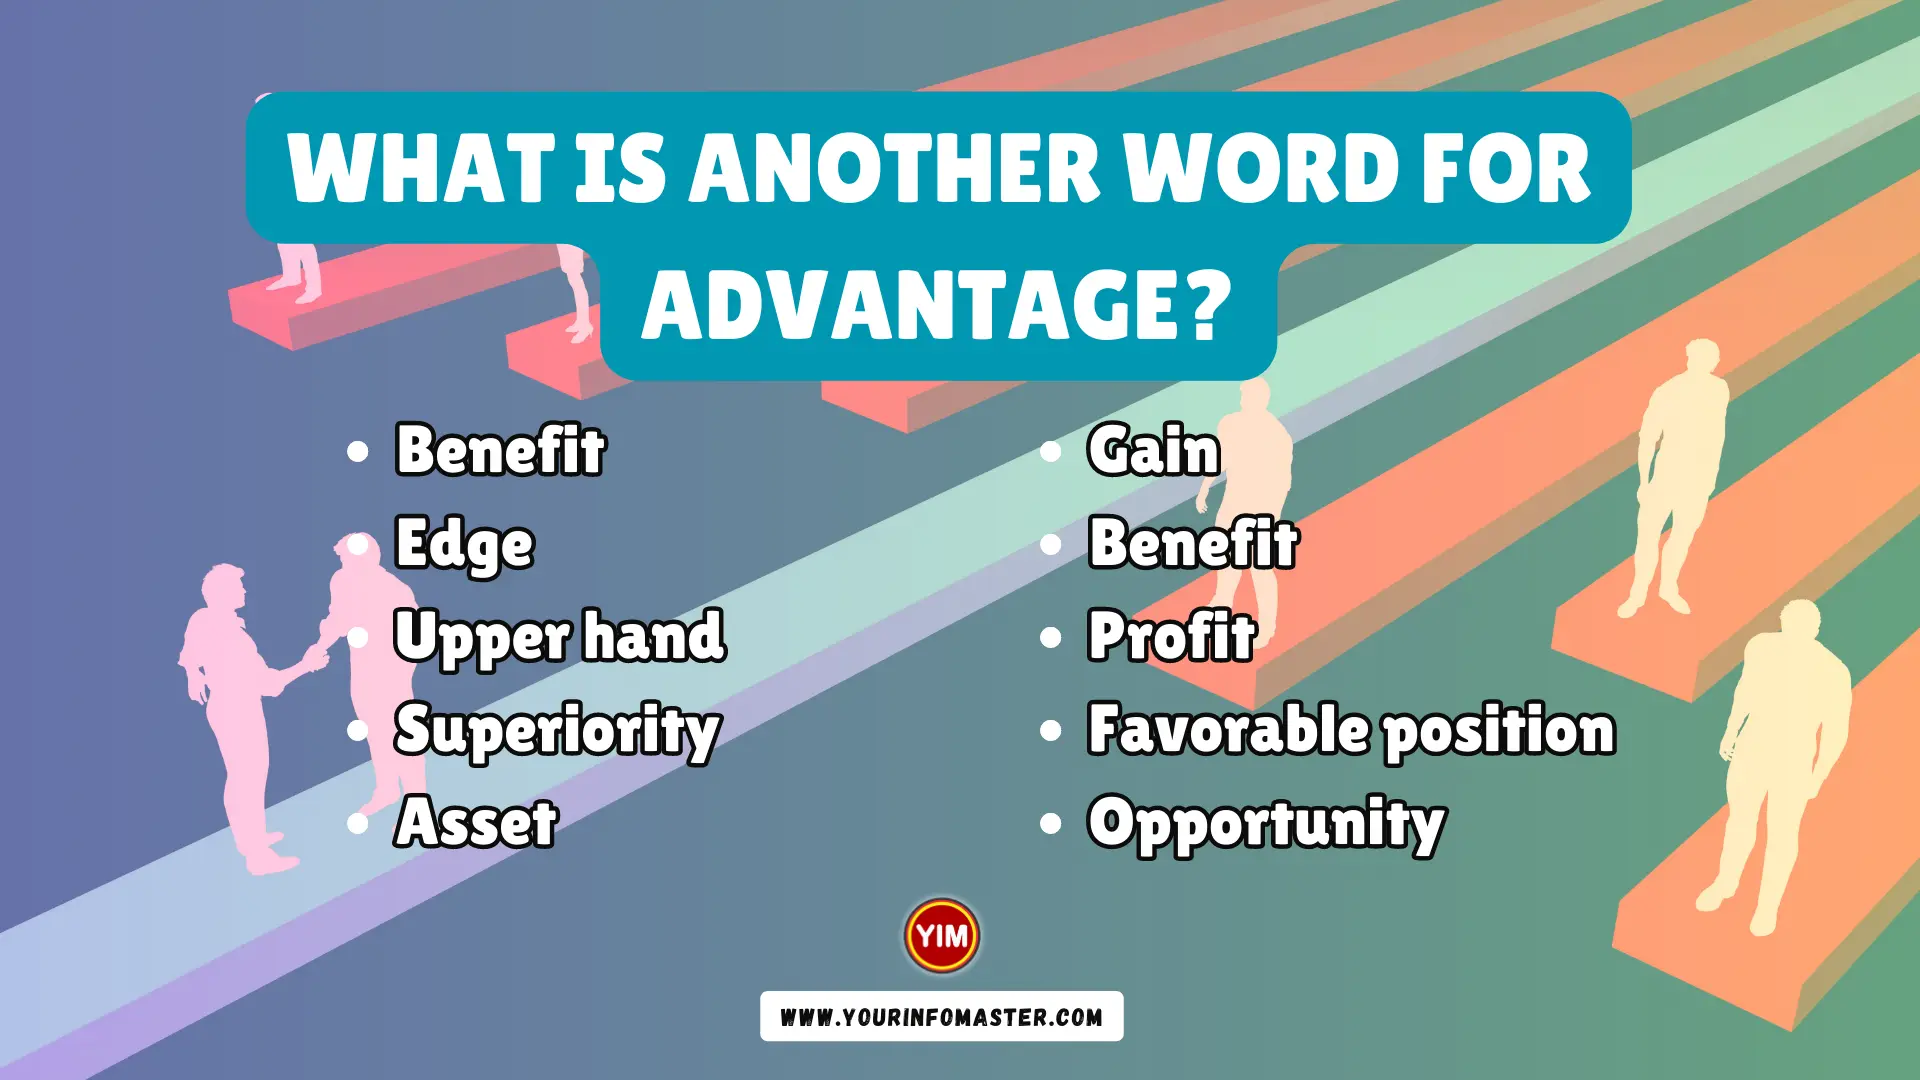 What is another word for Advantage